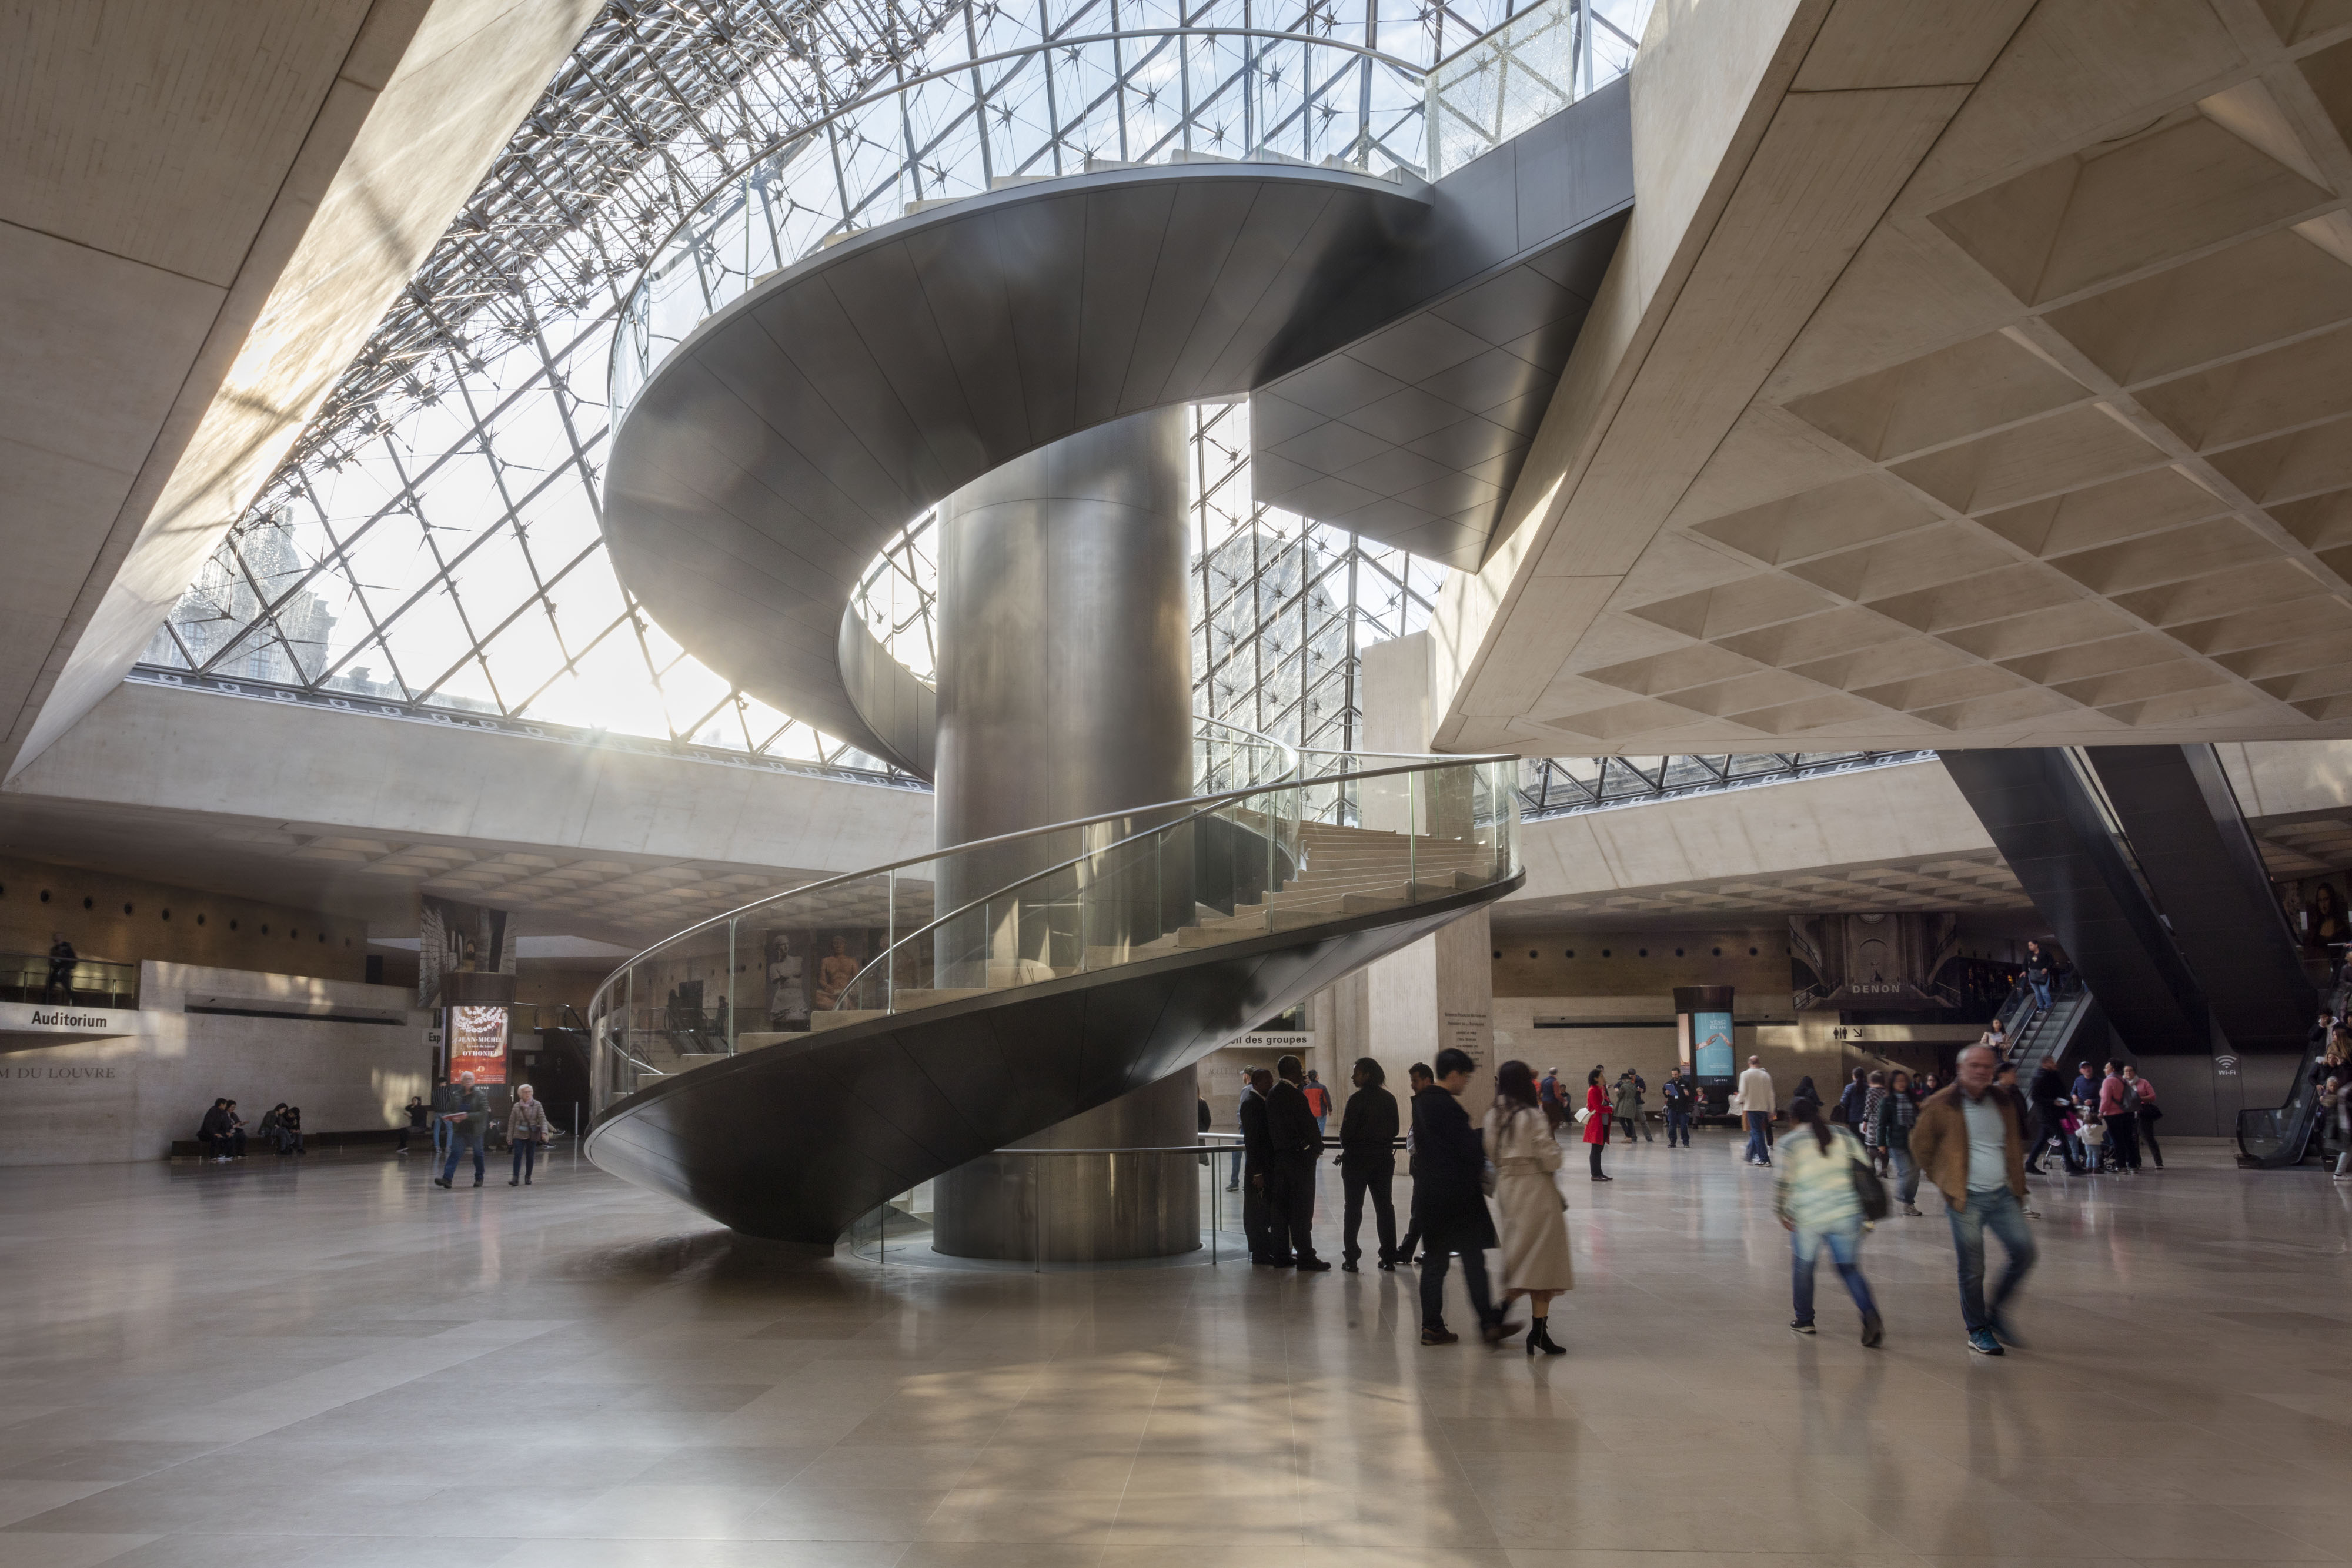 All You Need To Know About The Musee du Louvre In Paris